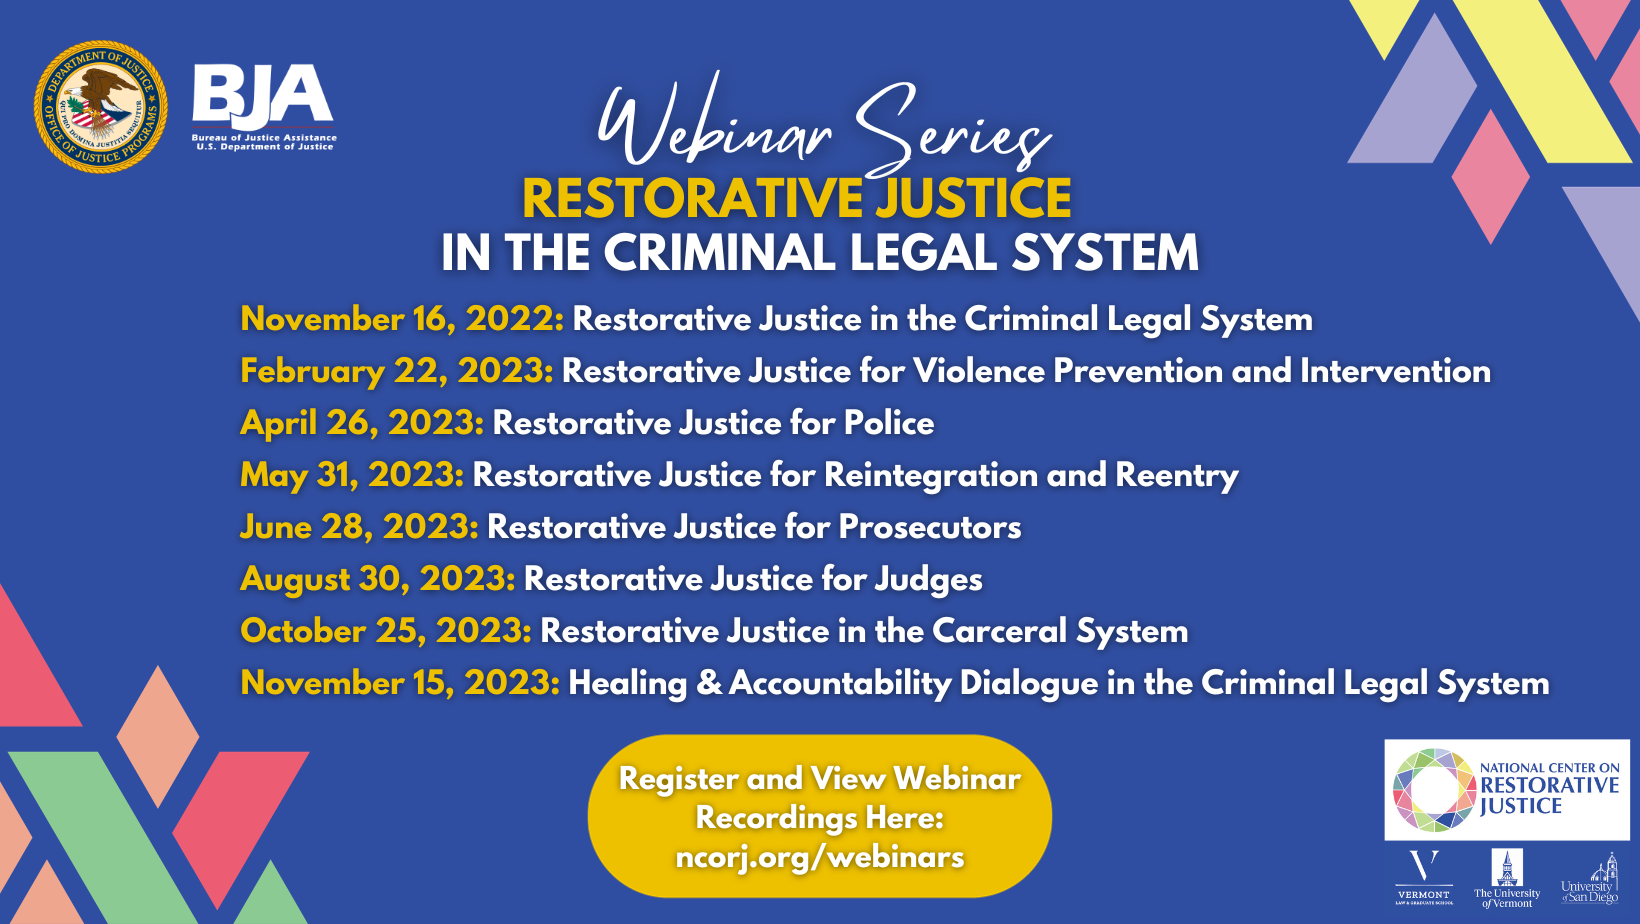 This is a flyer for the Webinar Series Restorative Justice in the Criminal Legal System. November 16, 2022 Restorative Justice in the Criminal Legal System February 22, 2023 Restorative Justice for Violence Prevention and Intervention April 26, 2023 Restorative Justice for Police May 31, 2023 Restorative Justice for Reintegration and Reentry June 28, 2023 Restorative Justice for Prosecutors August 30, 2023 Restorative Justice for Judges October 25 2023 Restorative Justice in the Carceral System November 15 2023 Victim-Offender Dialogue in the Criminal Legal System At the bottom of the image text that reads Register and View Webinar Recordings Here: ncorj.org/webinars